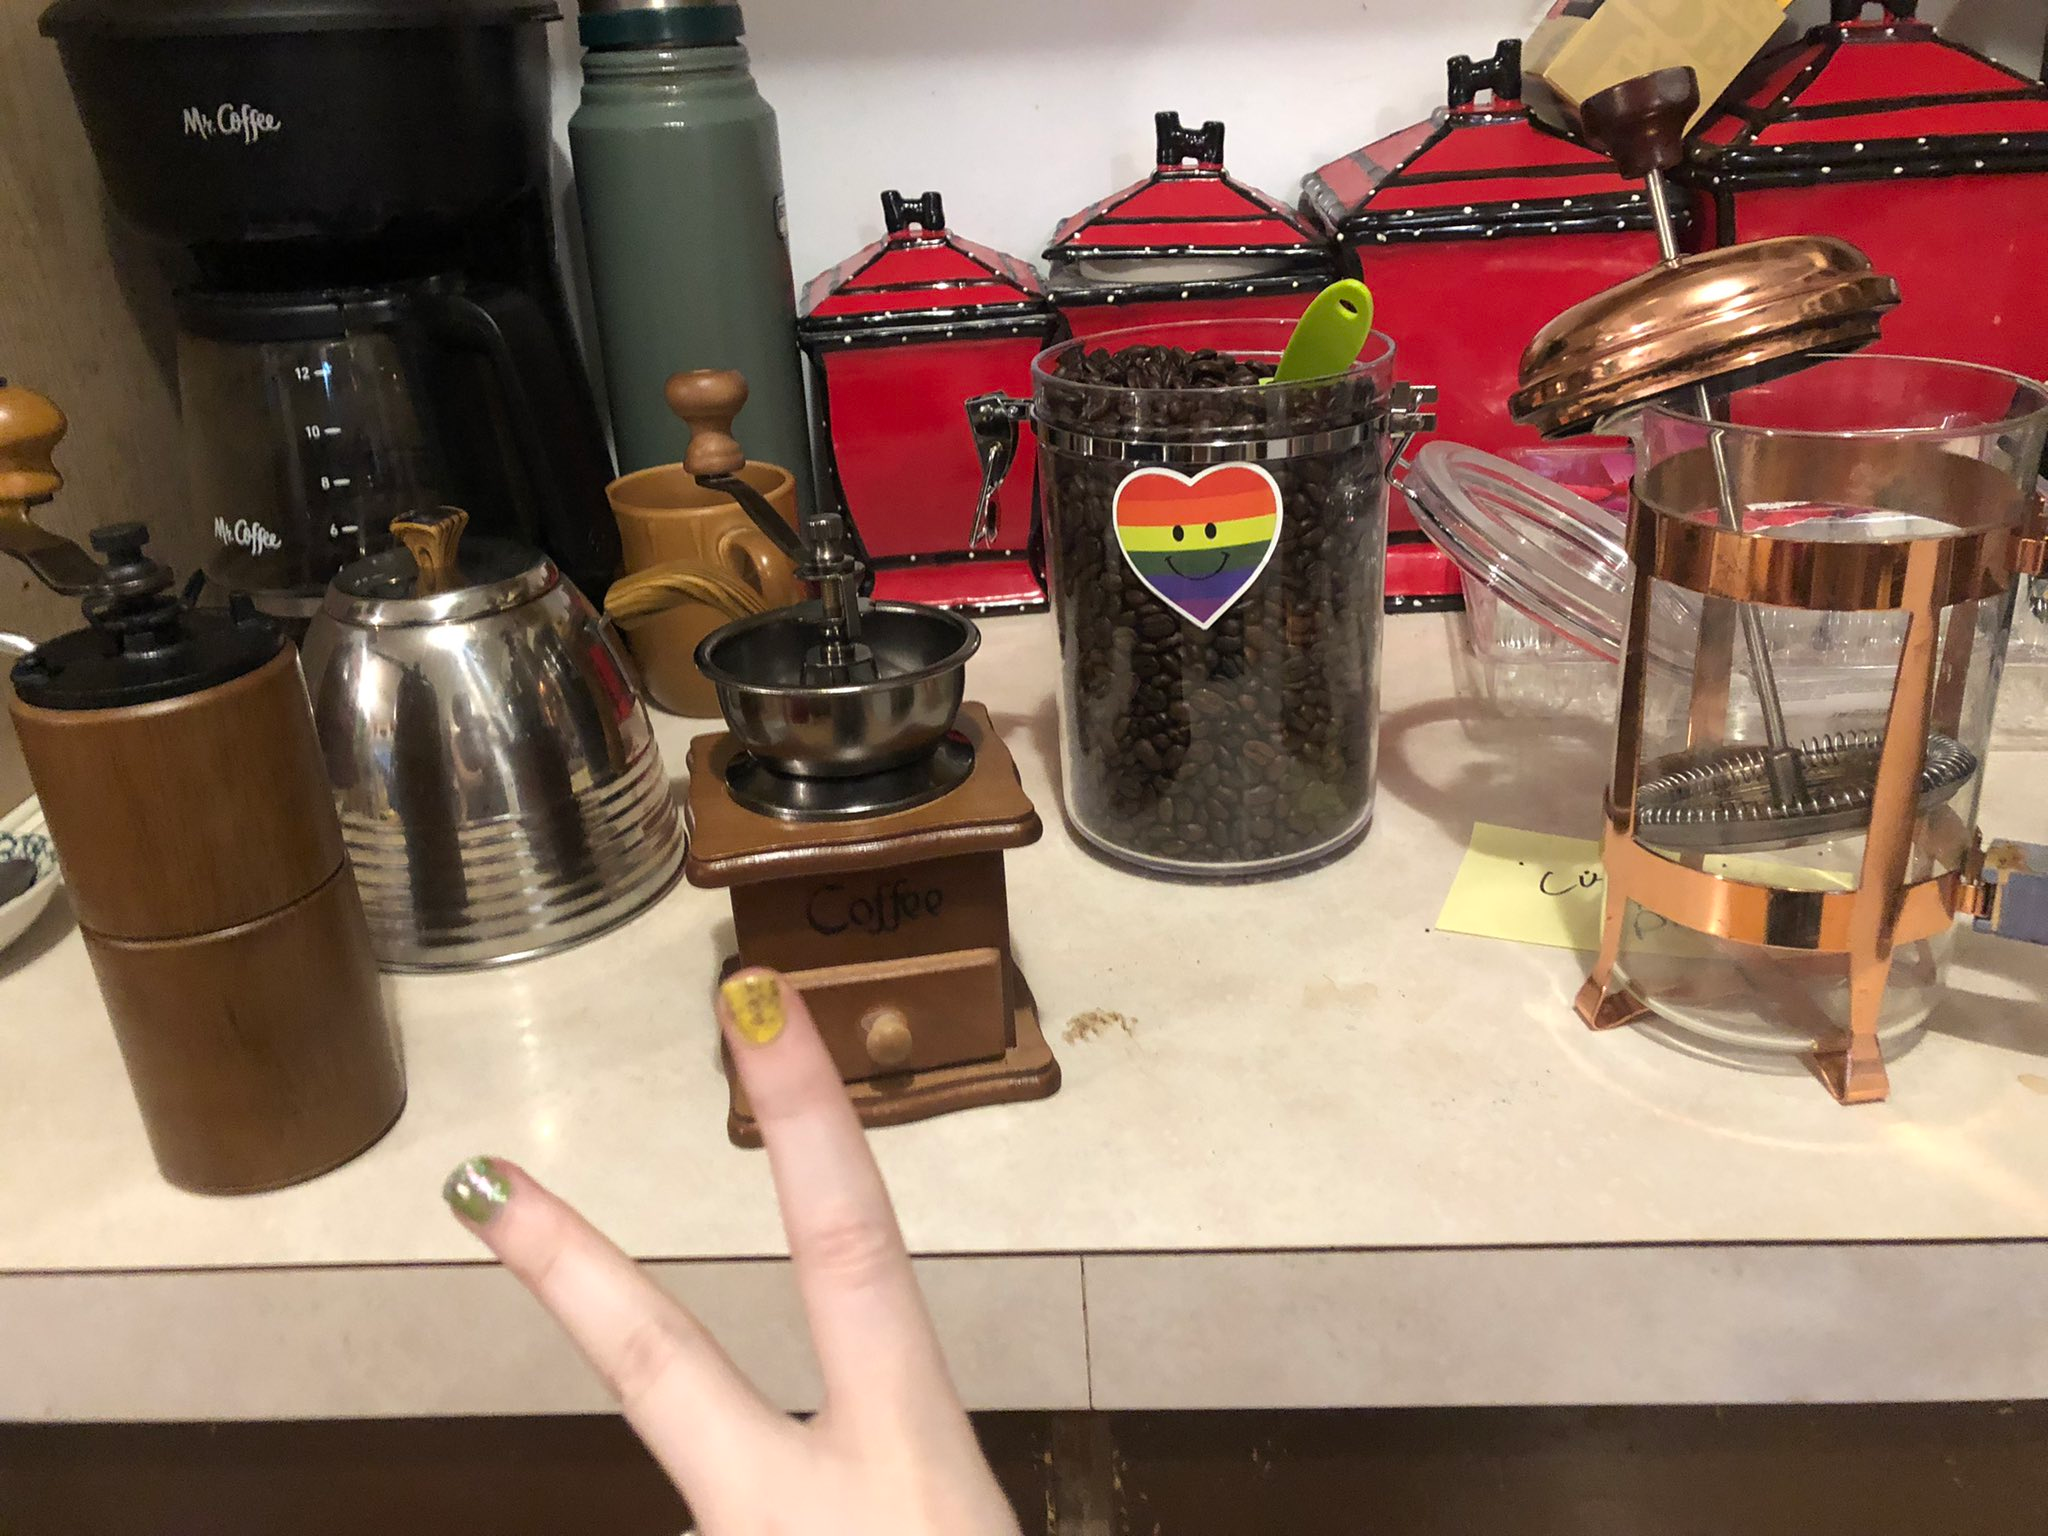 a copper french press, a wooden burr handheld grinder, a steel gooseneck kettle, a small tabletop wooden burr grinder, a clear snap canister of coffee beans with gay pride stickers, and a kitchen scale barely in frame.